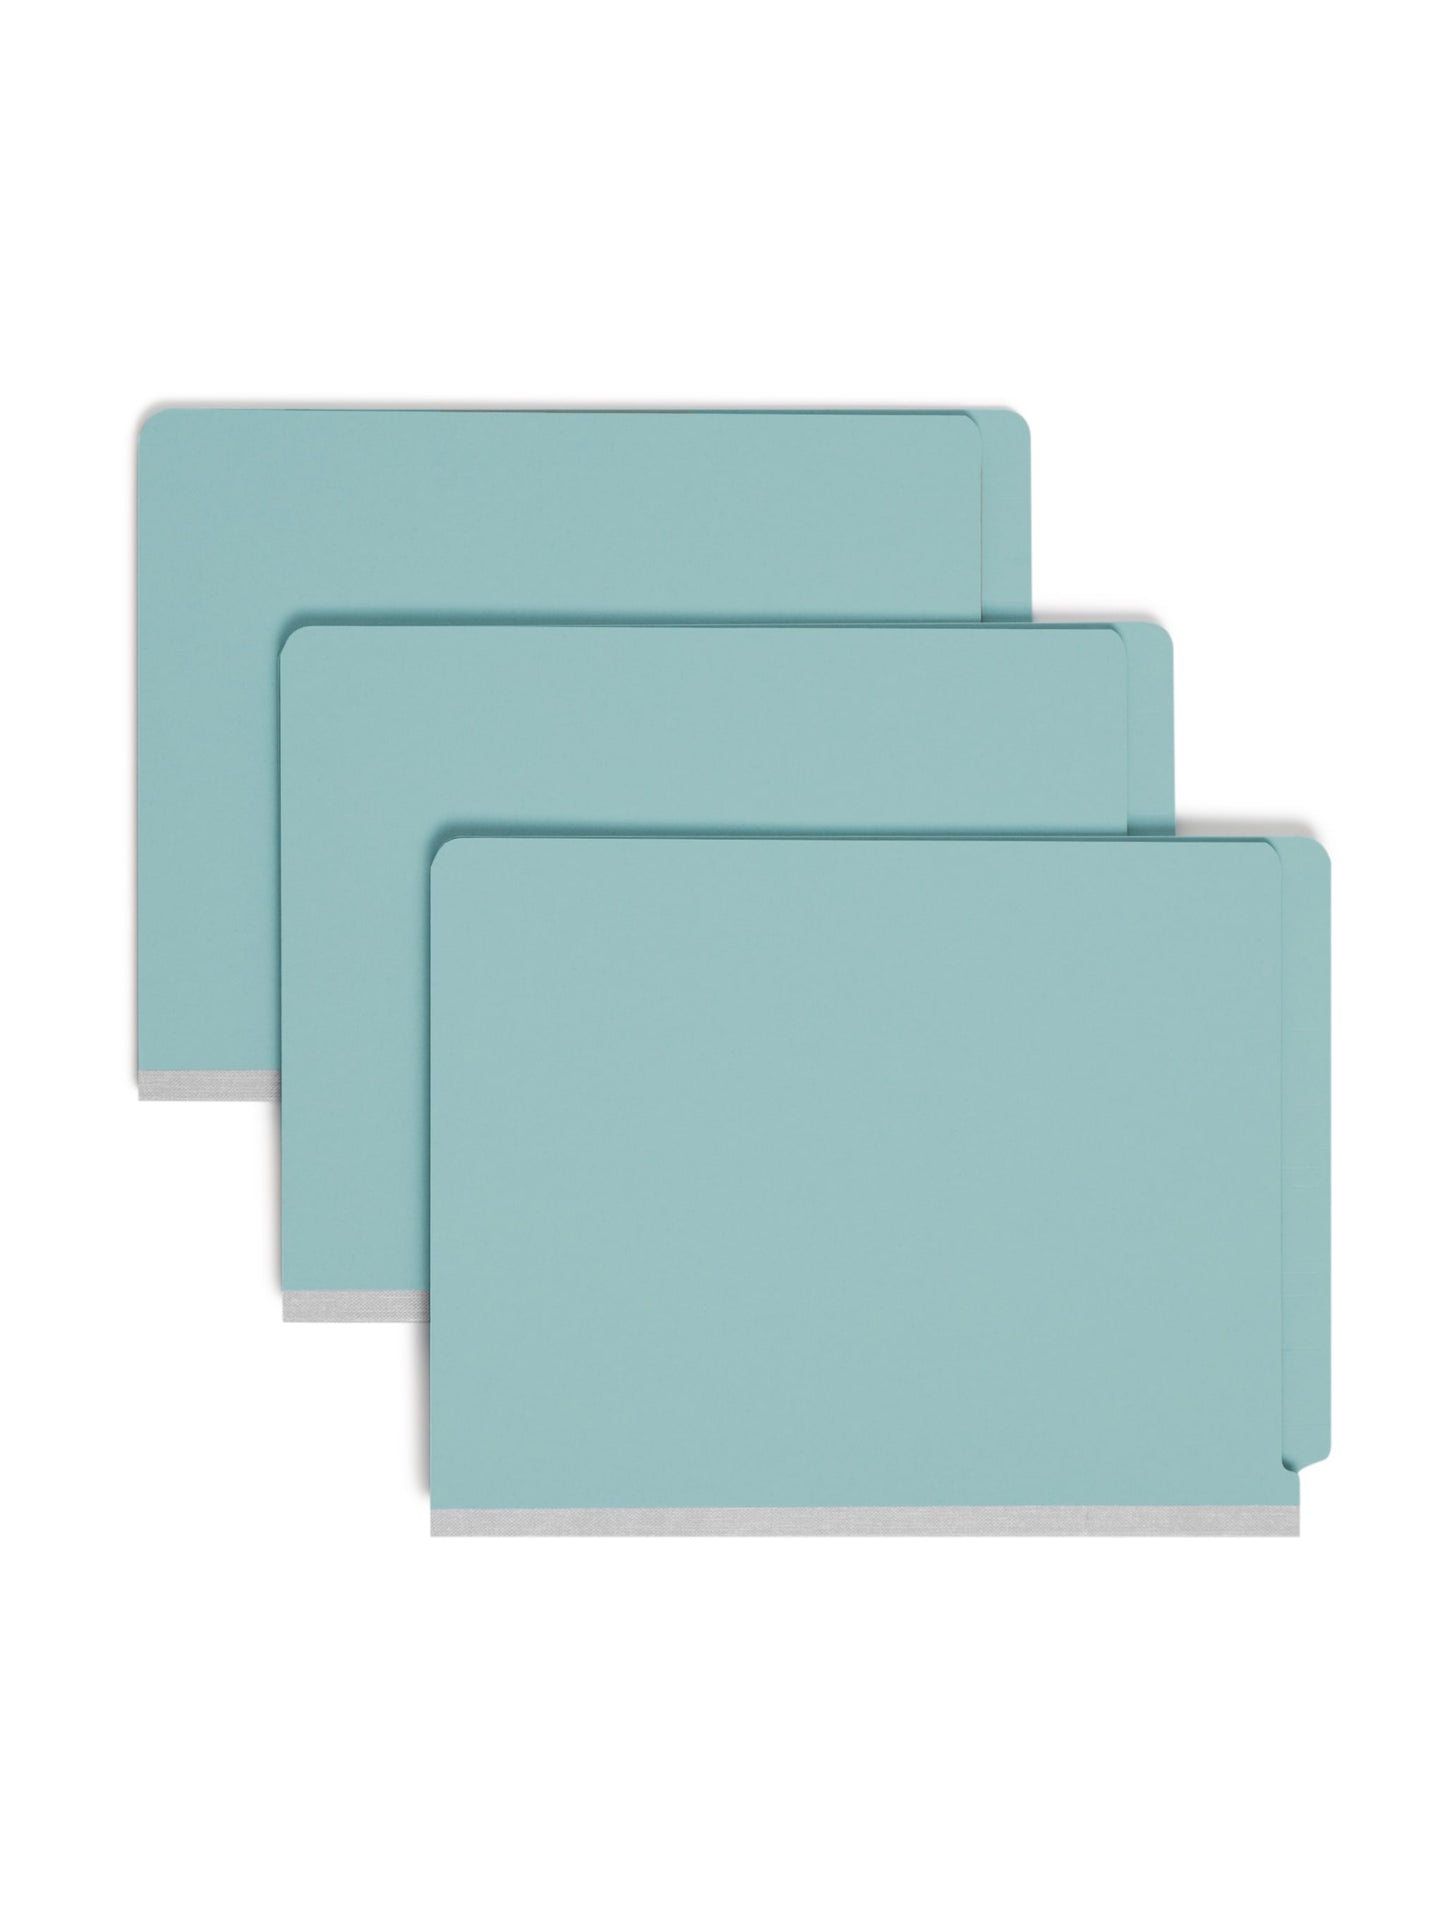 SafeSHIELD® Pressboard End Tab Classification File Folders, Straight-Cut Tab, 2 inch Expansion, 2 Divider, Blue Color, Letter Size, Set of 0, 30086486267817